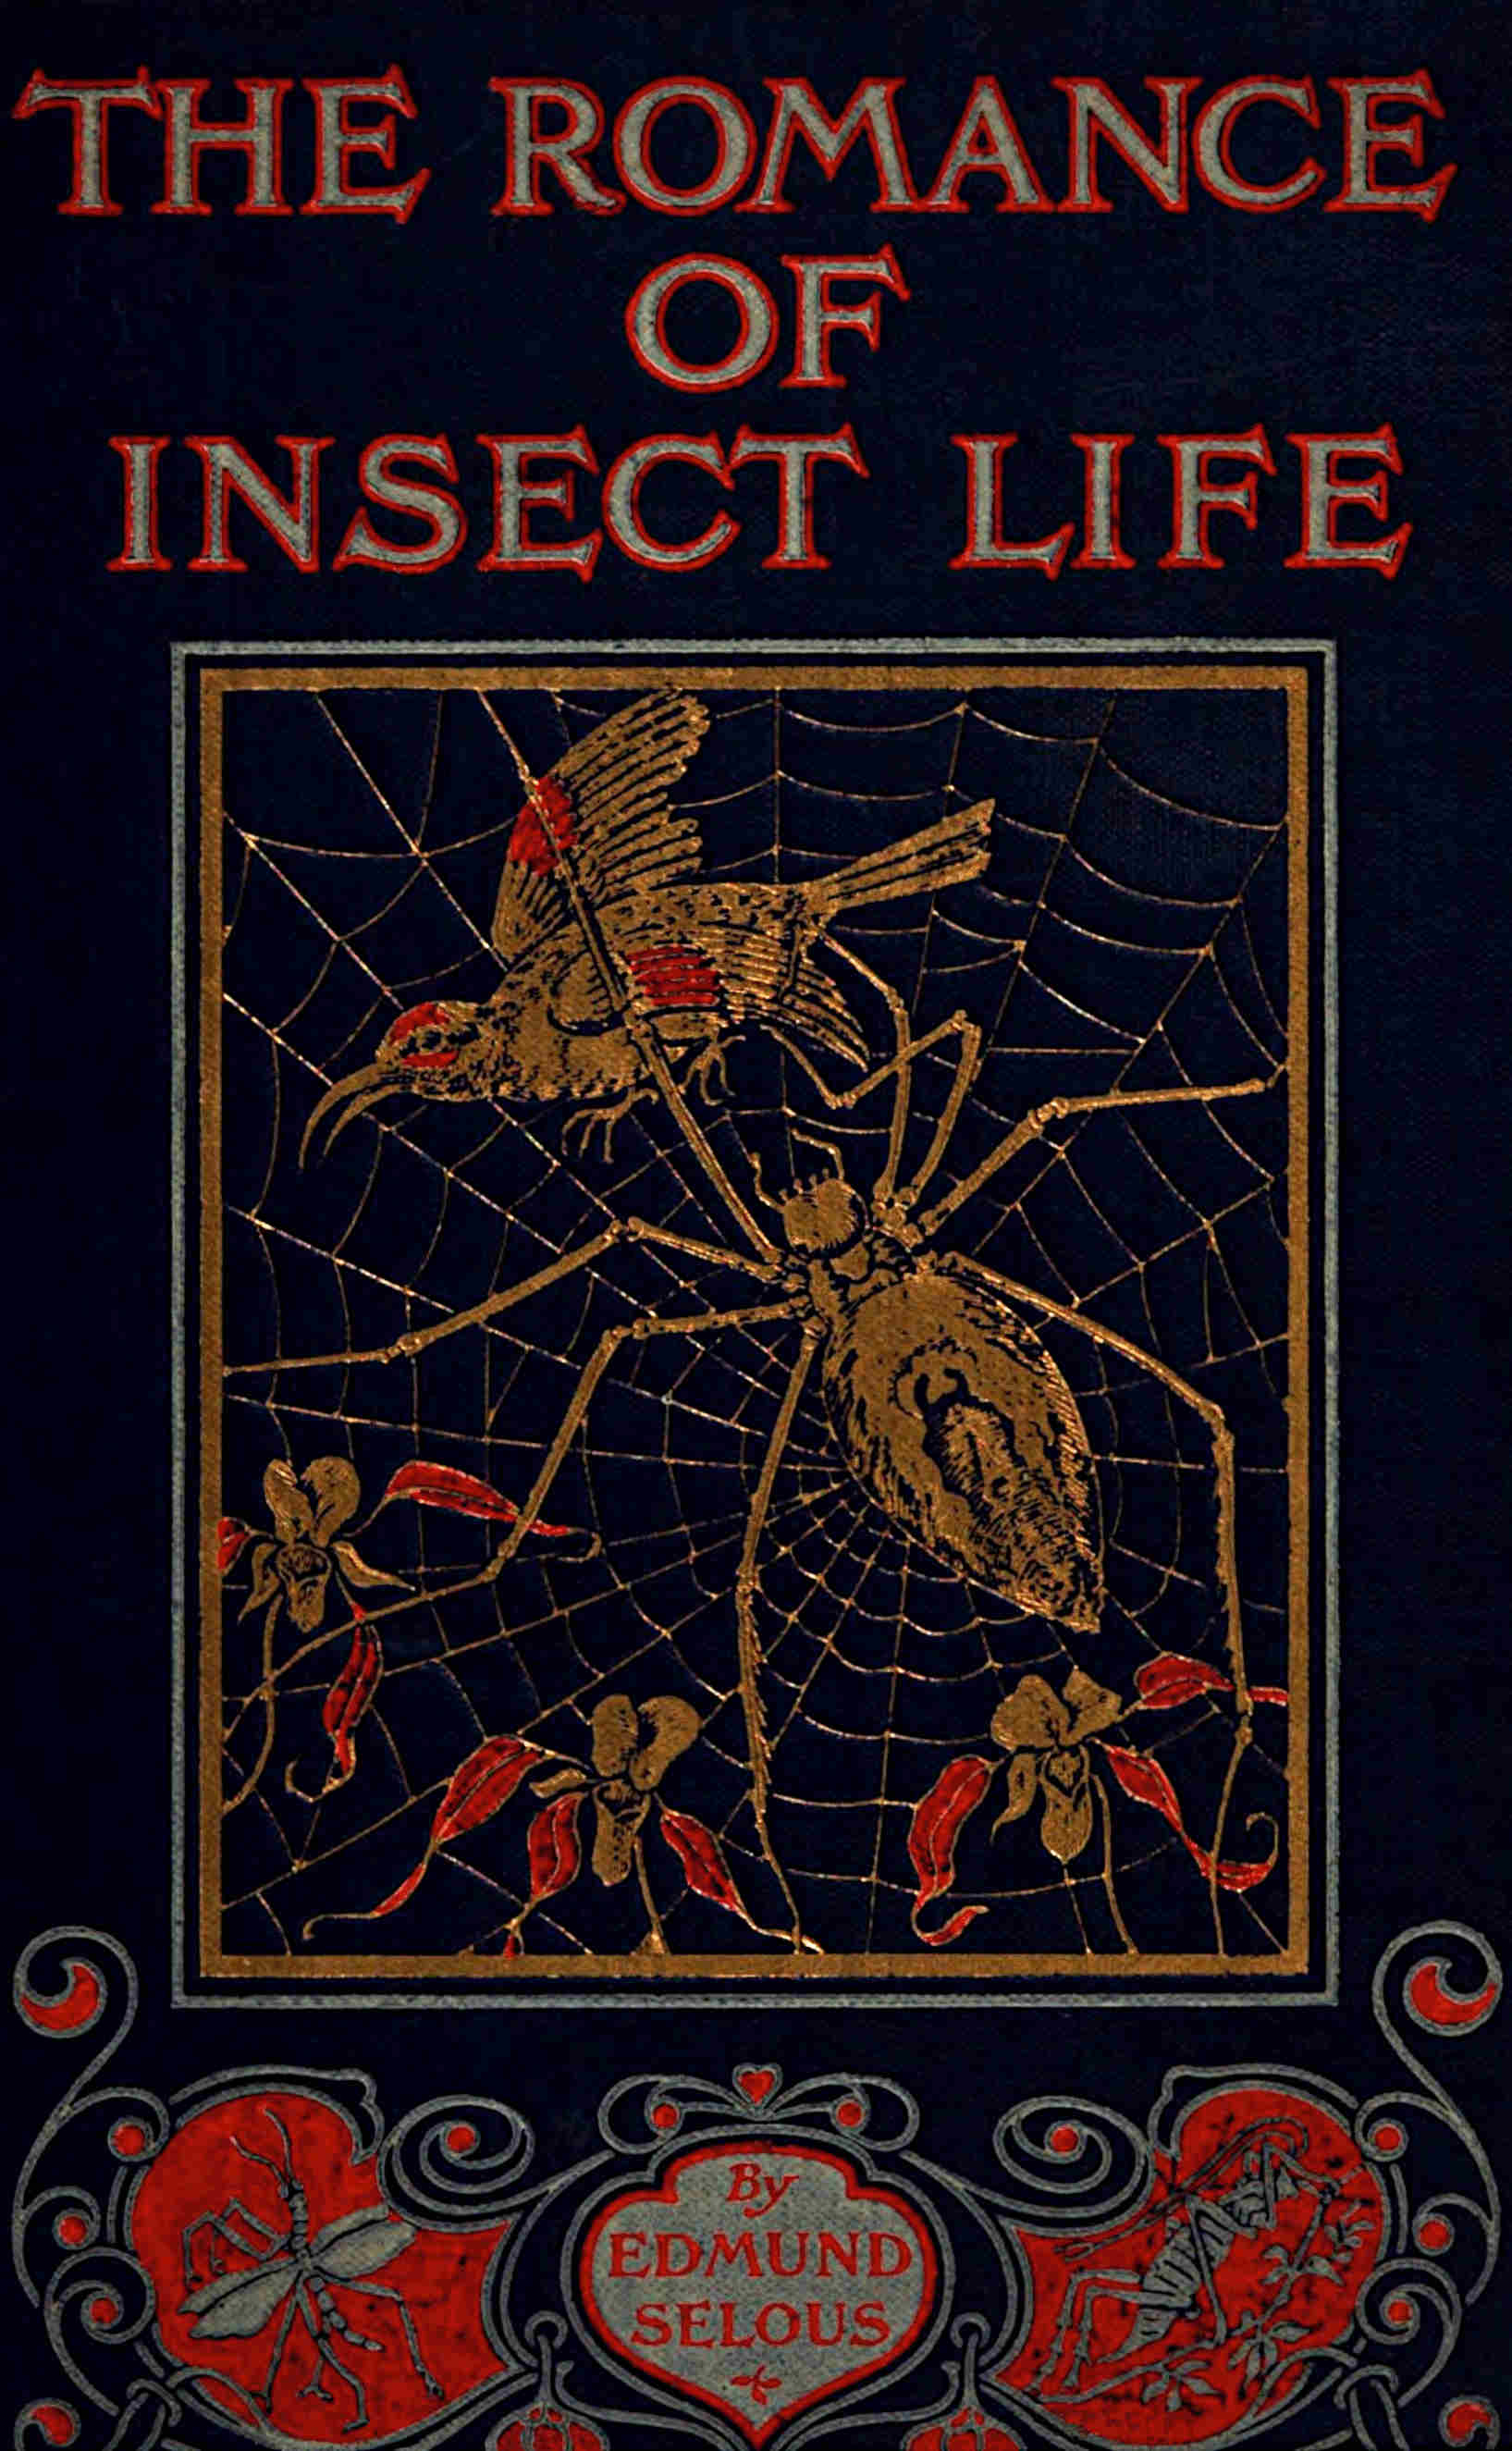 The romance of insect life